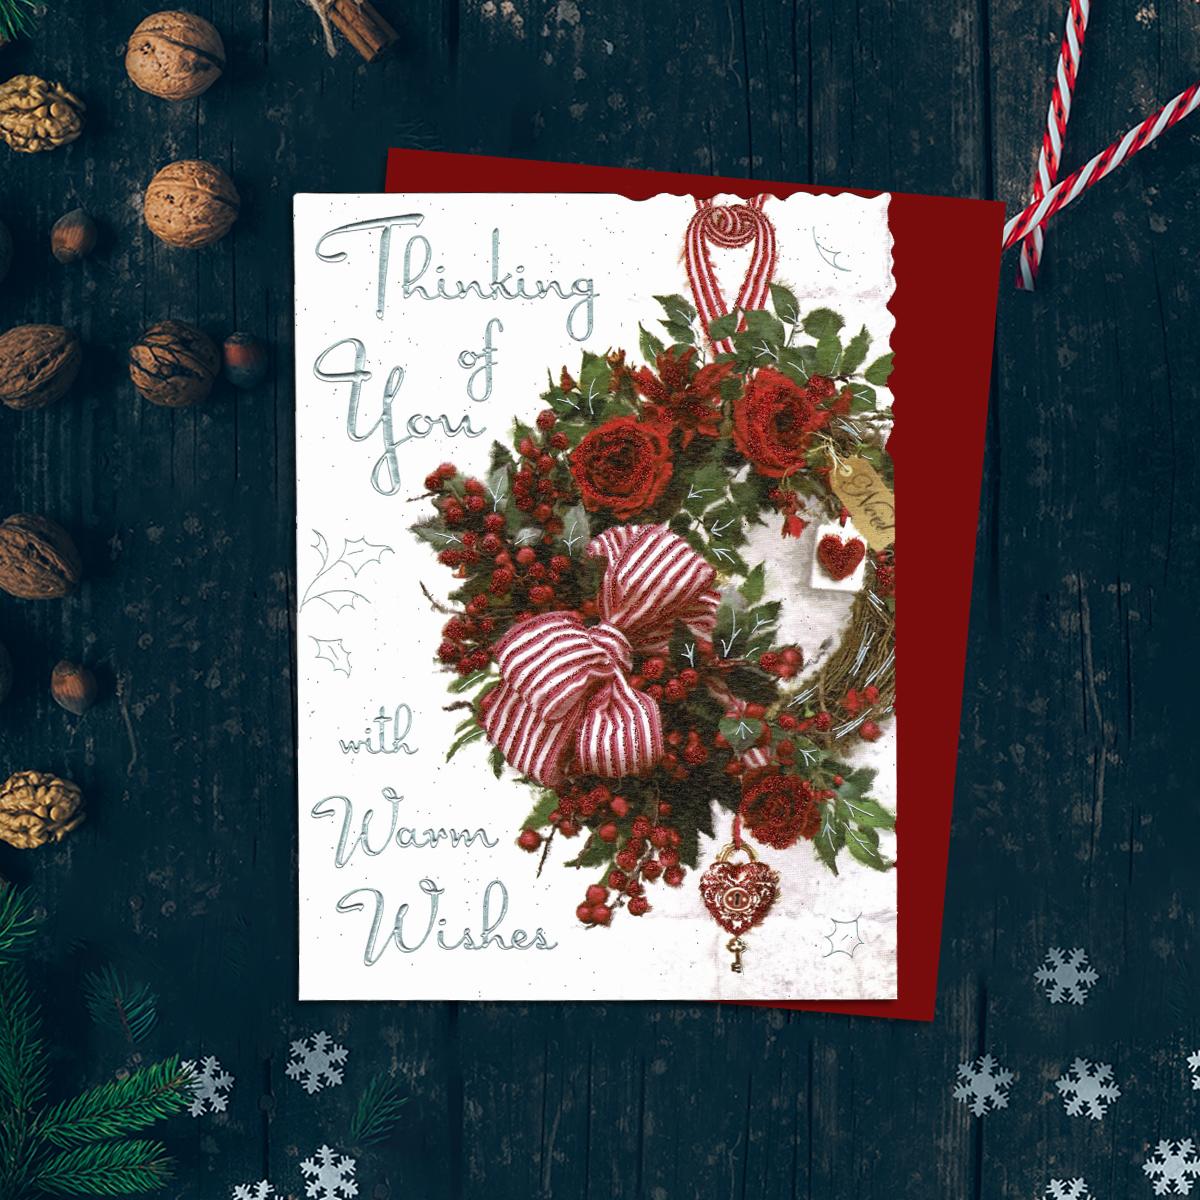 Thinking Of You With warm wishes Featuring A Christmas Wreath Filled With Red Roses, Berries And Hearts. Finished With Silver Foil Detail, Red Glitter and Red Envelope